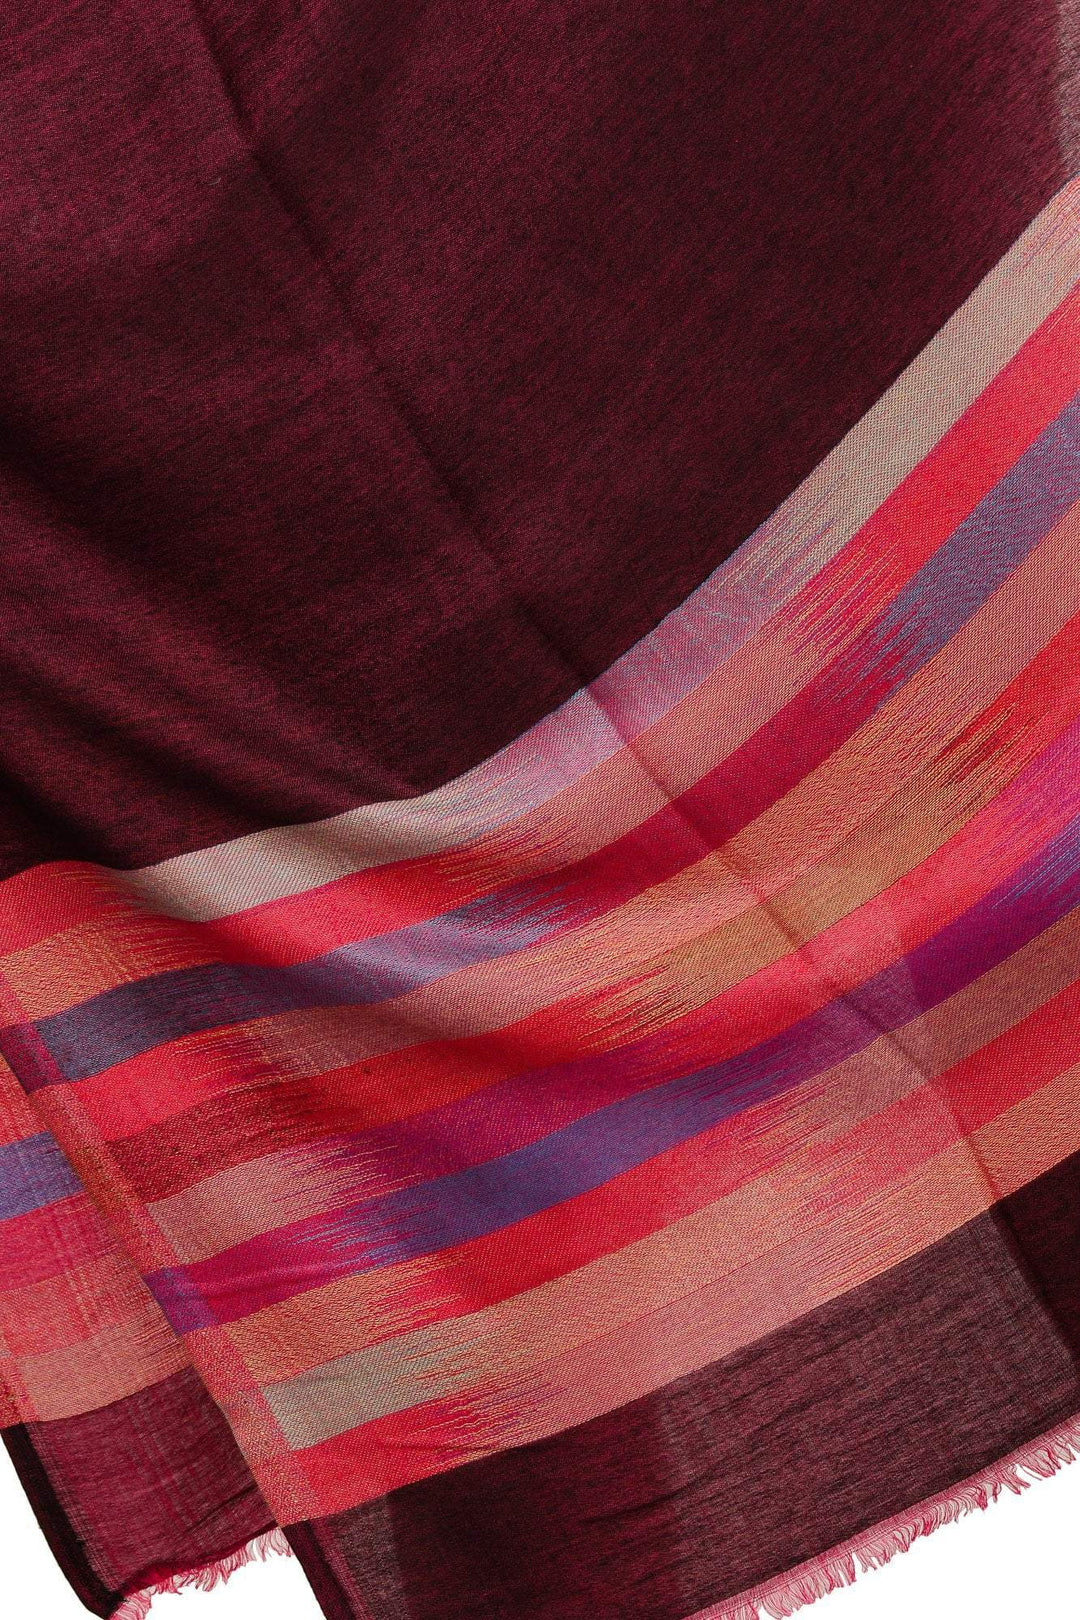 Pashtush Womens Soft Bamboo Stole, Reversible Design, Twin Colored, With Multi Colored Stripes